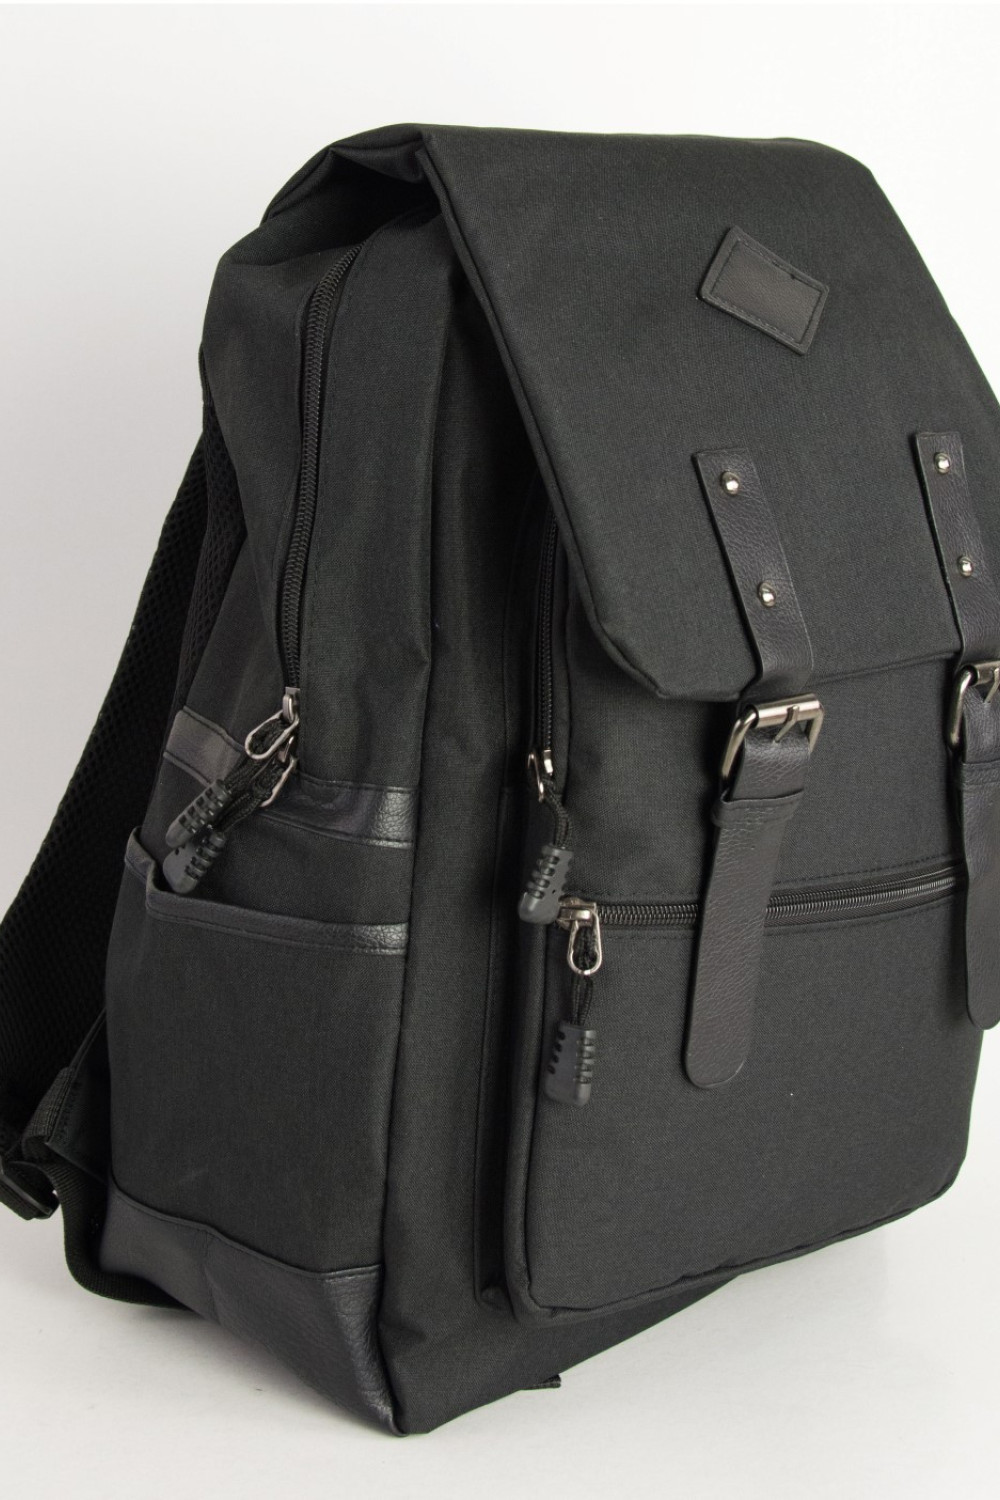 Men's black fabric Backpack with pockets 50502L